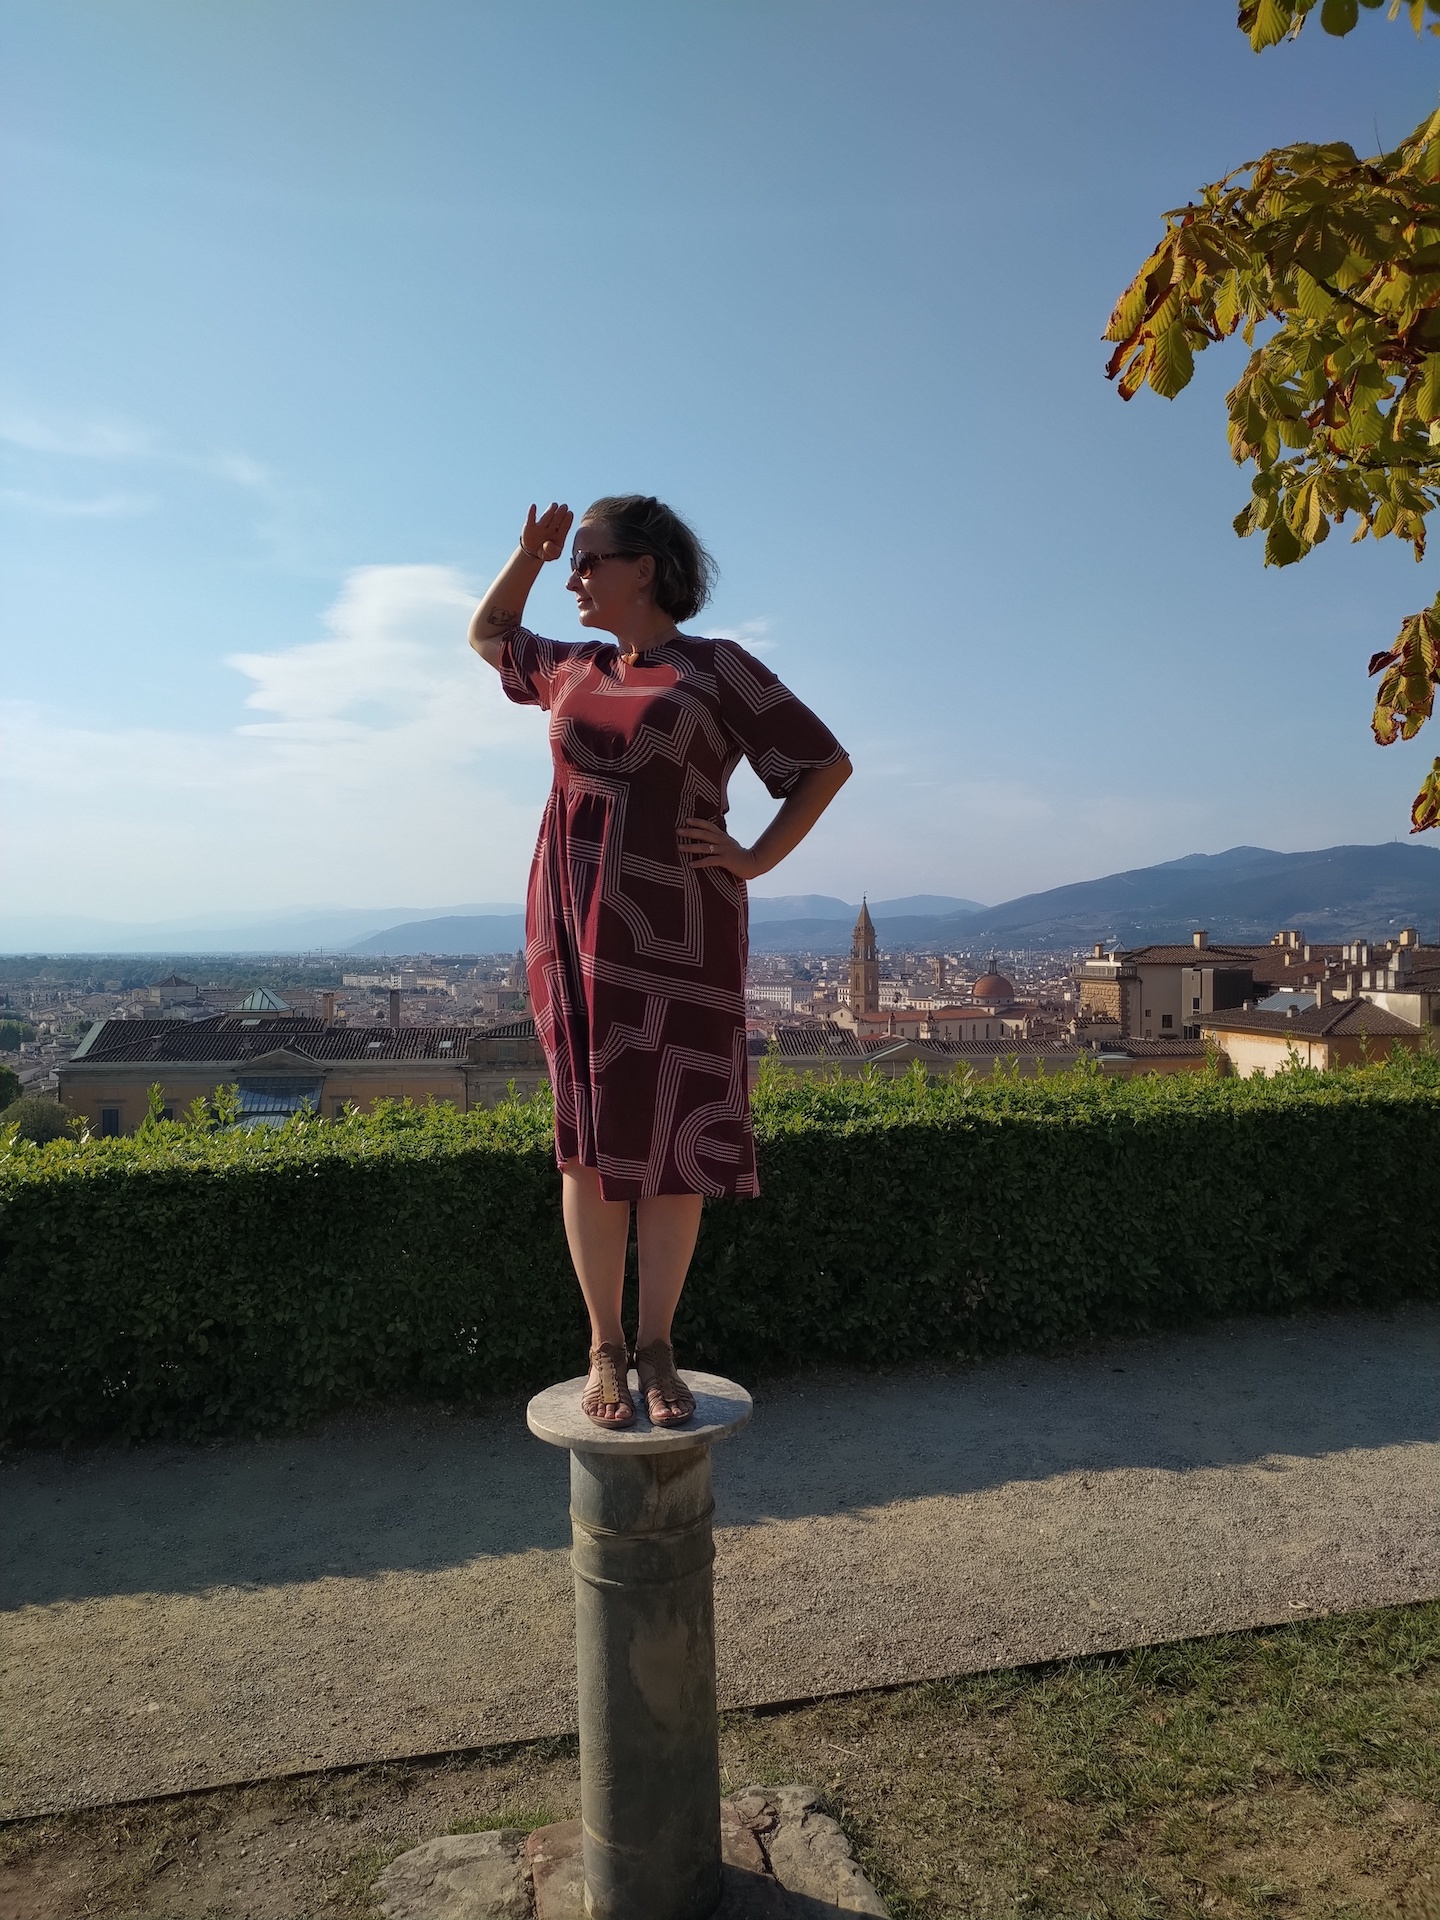 Dr. Brandy Ellison at the Boboli Gardens in Florence, Italy